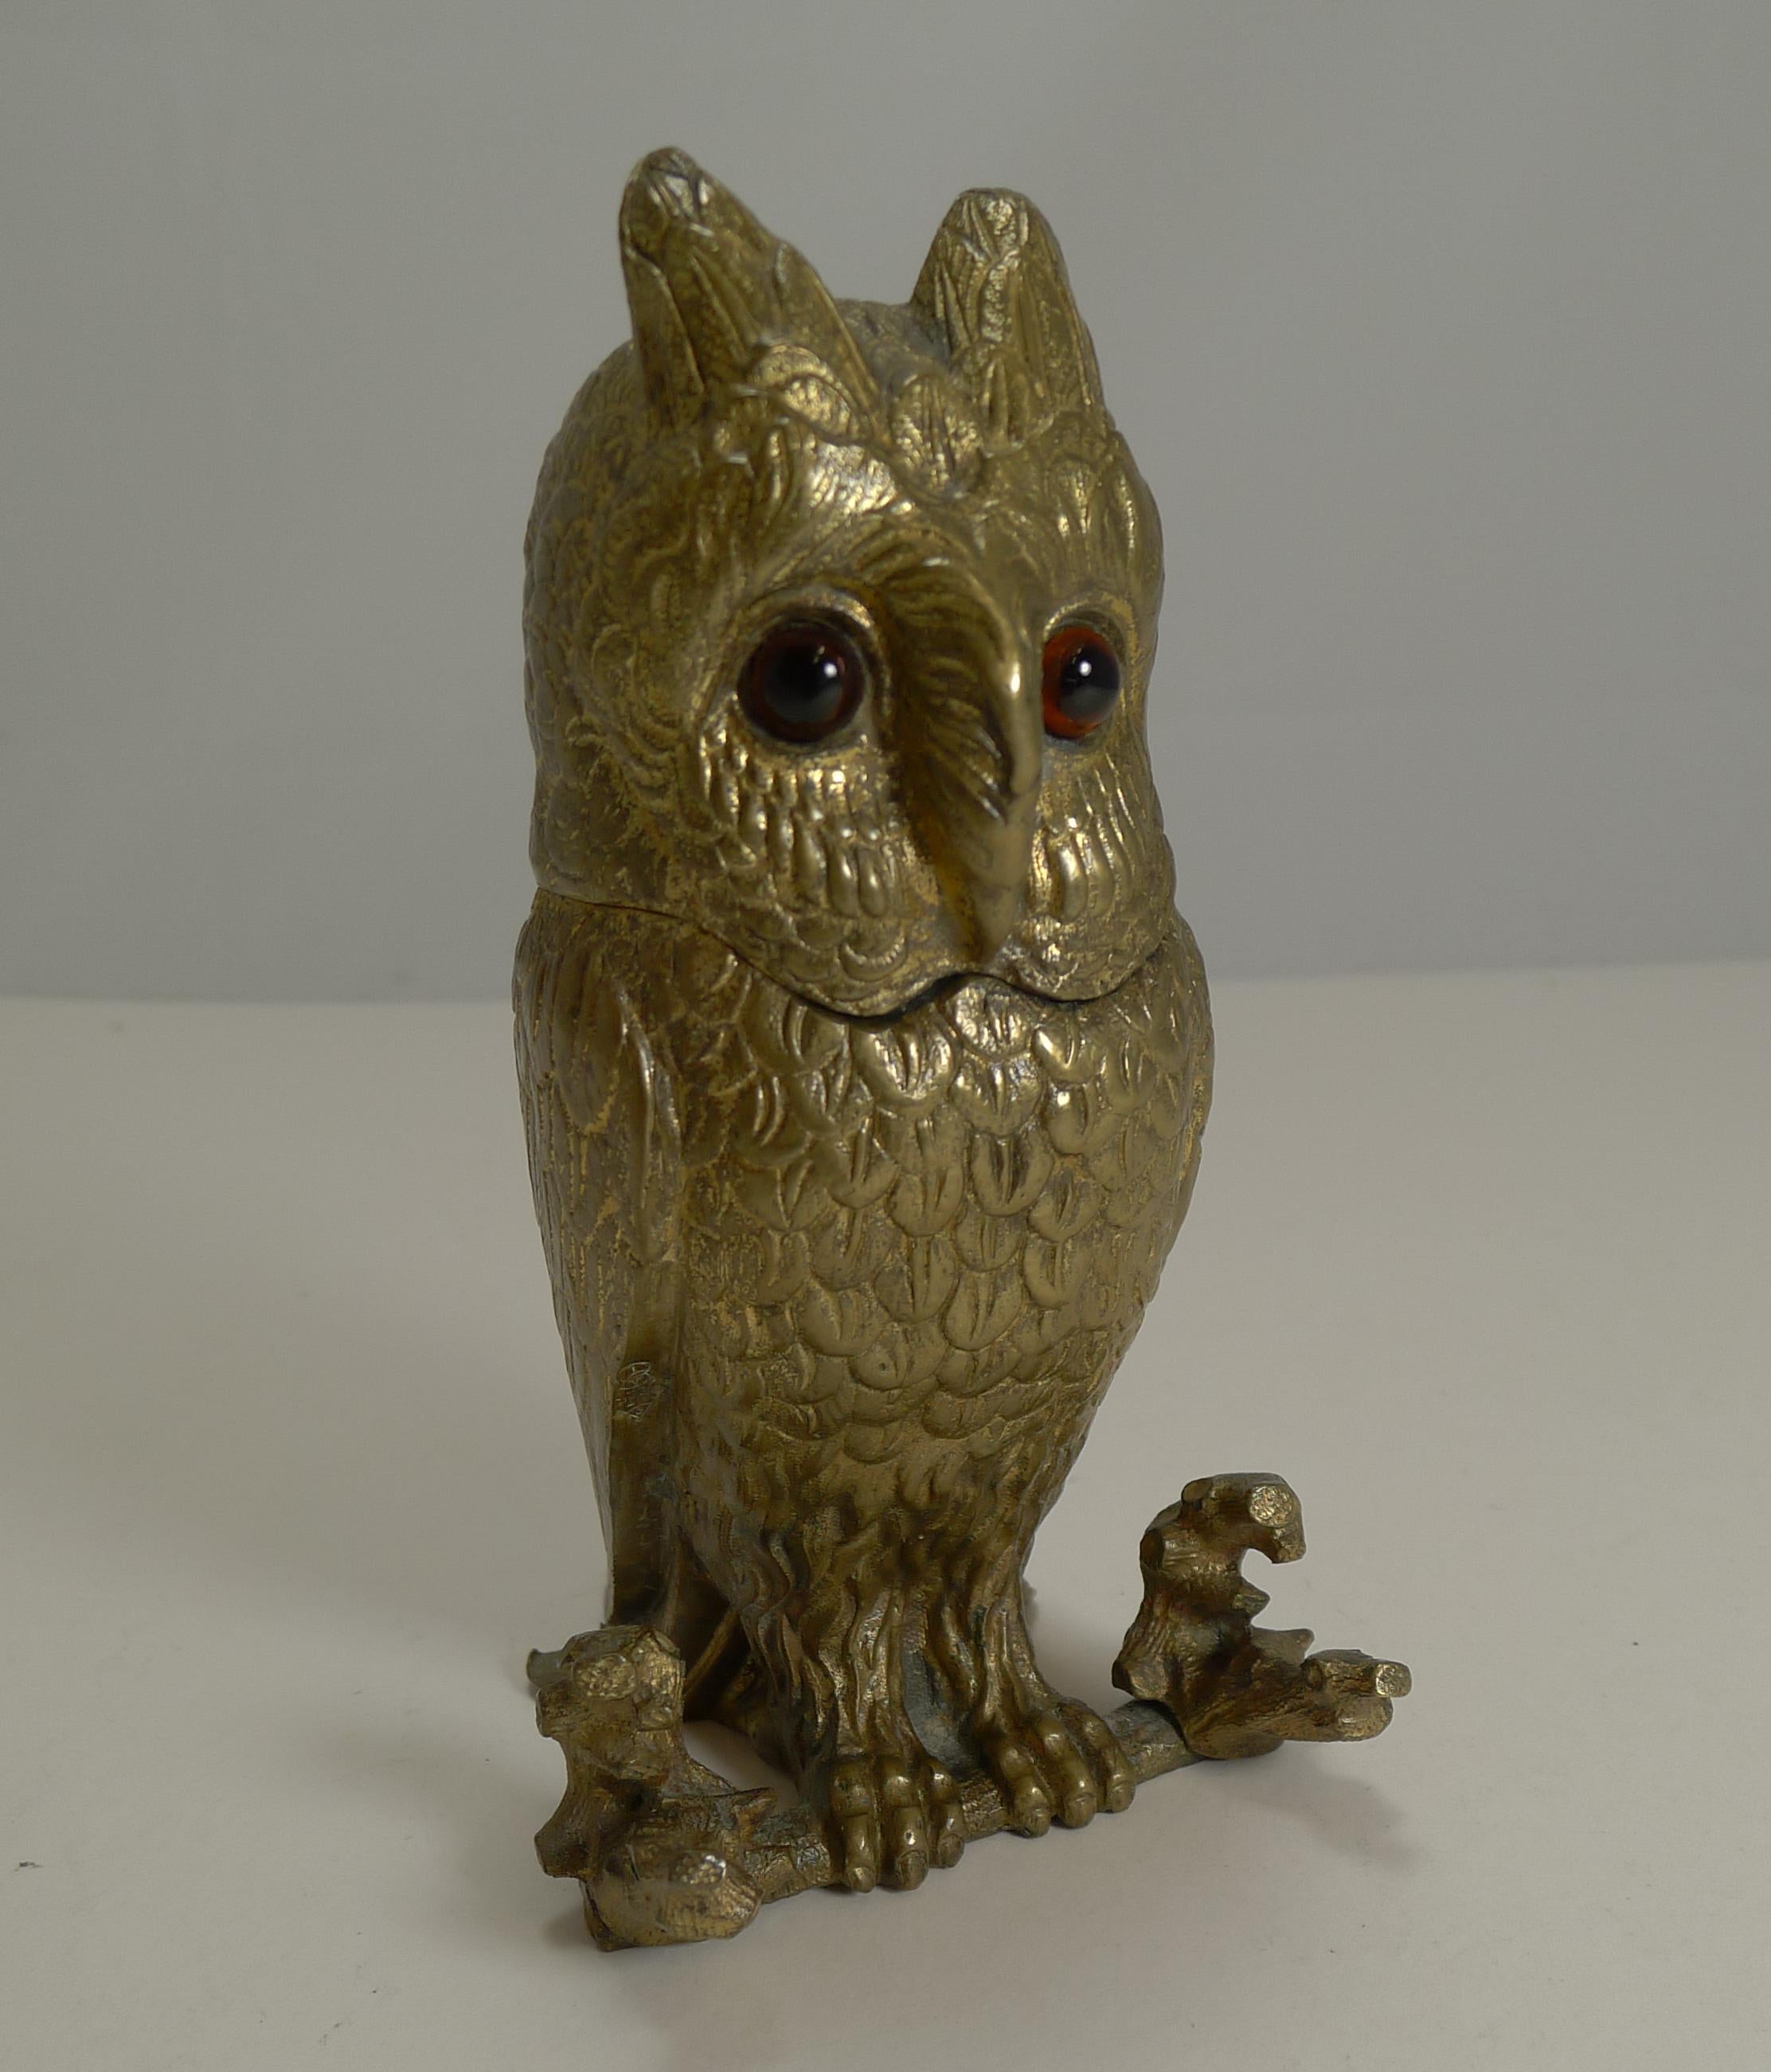 A sensational heavy cast bronze inkwell beautifully cast in the form of an owl, retaining his wonderful original glass eyes, undamaged and a fabulous gilded finish. To the front an integral pen rest as can be seen in the pictures.

The hinged lid